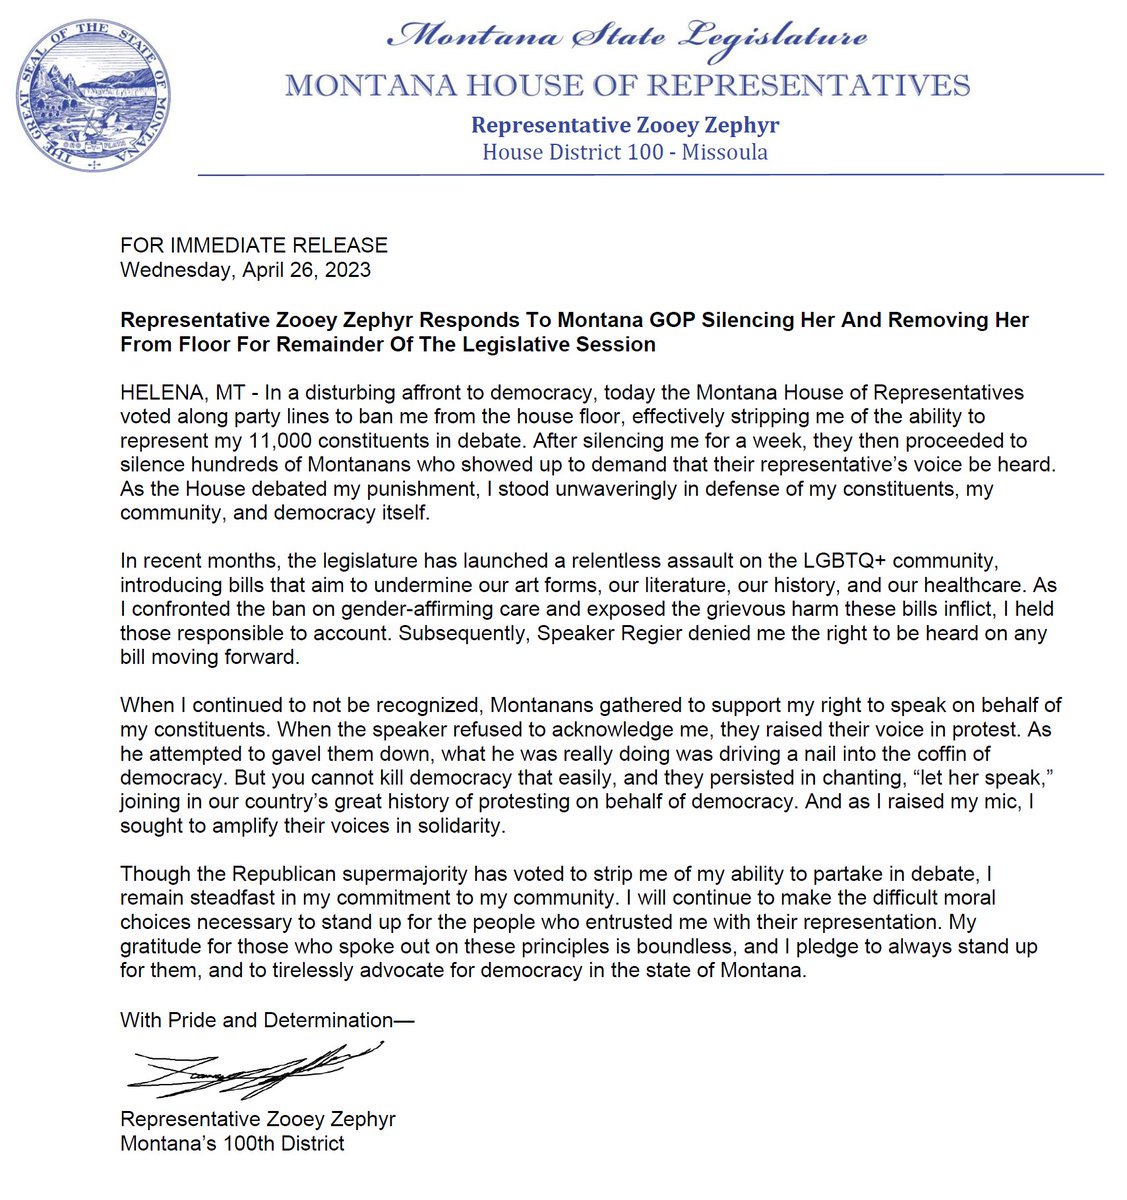 My statement on the Montana GOP's undemocratic decision to ban me from debate on the House floor: Today I stood unwaveringly in defense of my constituents, my community, and democracy itself. And I pledge to always do so.